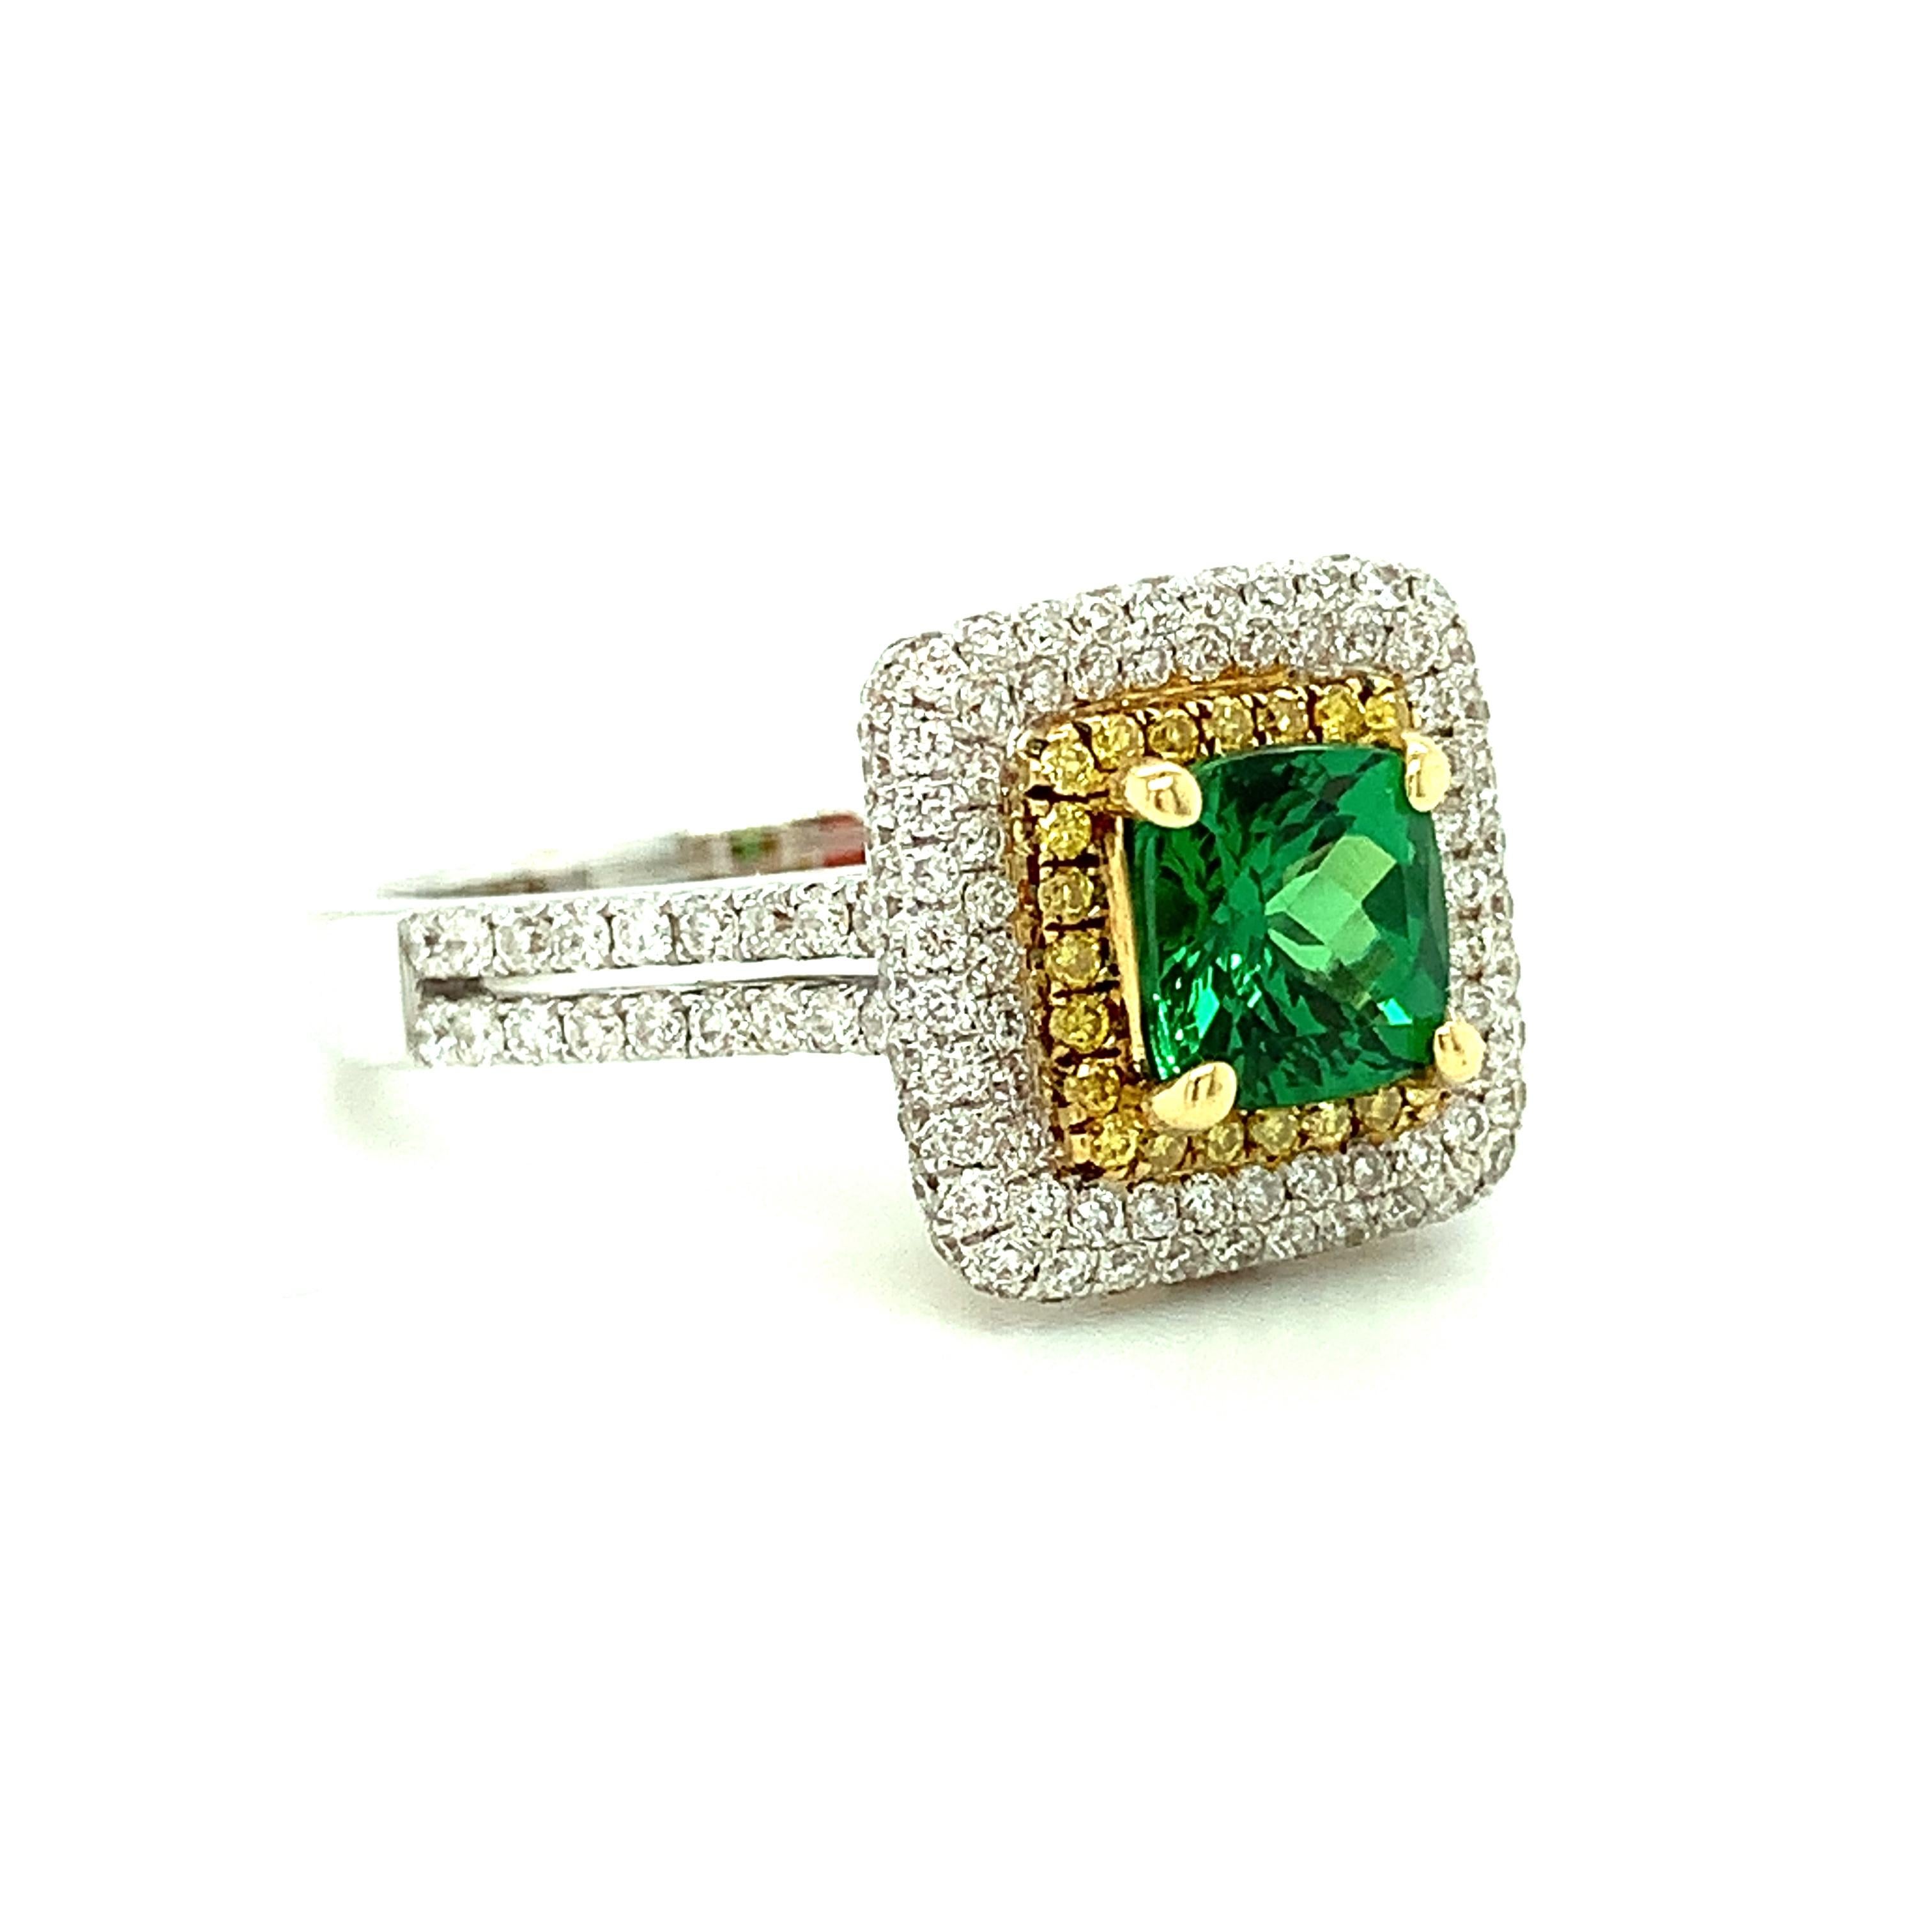 Cushion Cut Tsavorite Garnet and Yellow Diamond Halo Cocktail Ring in Yellow and White Gold For Sale